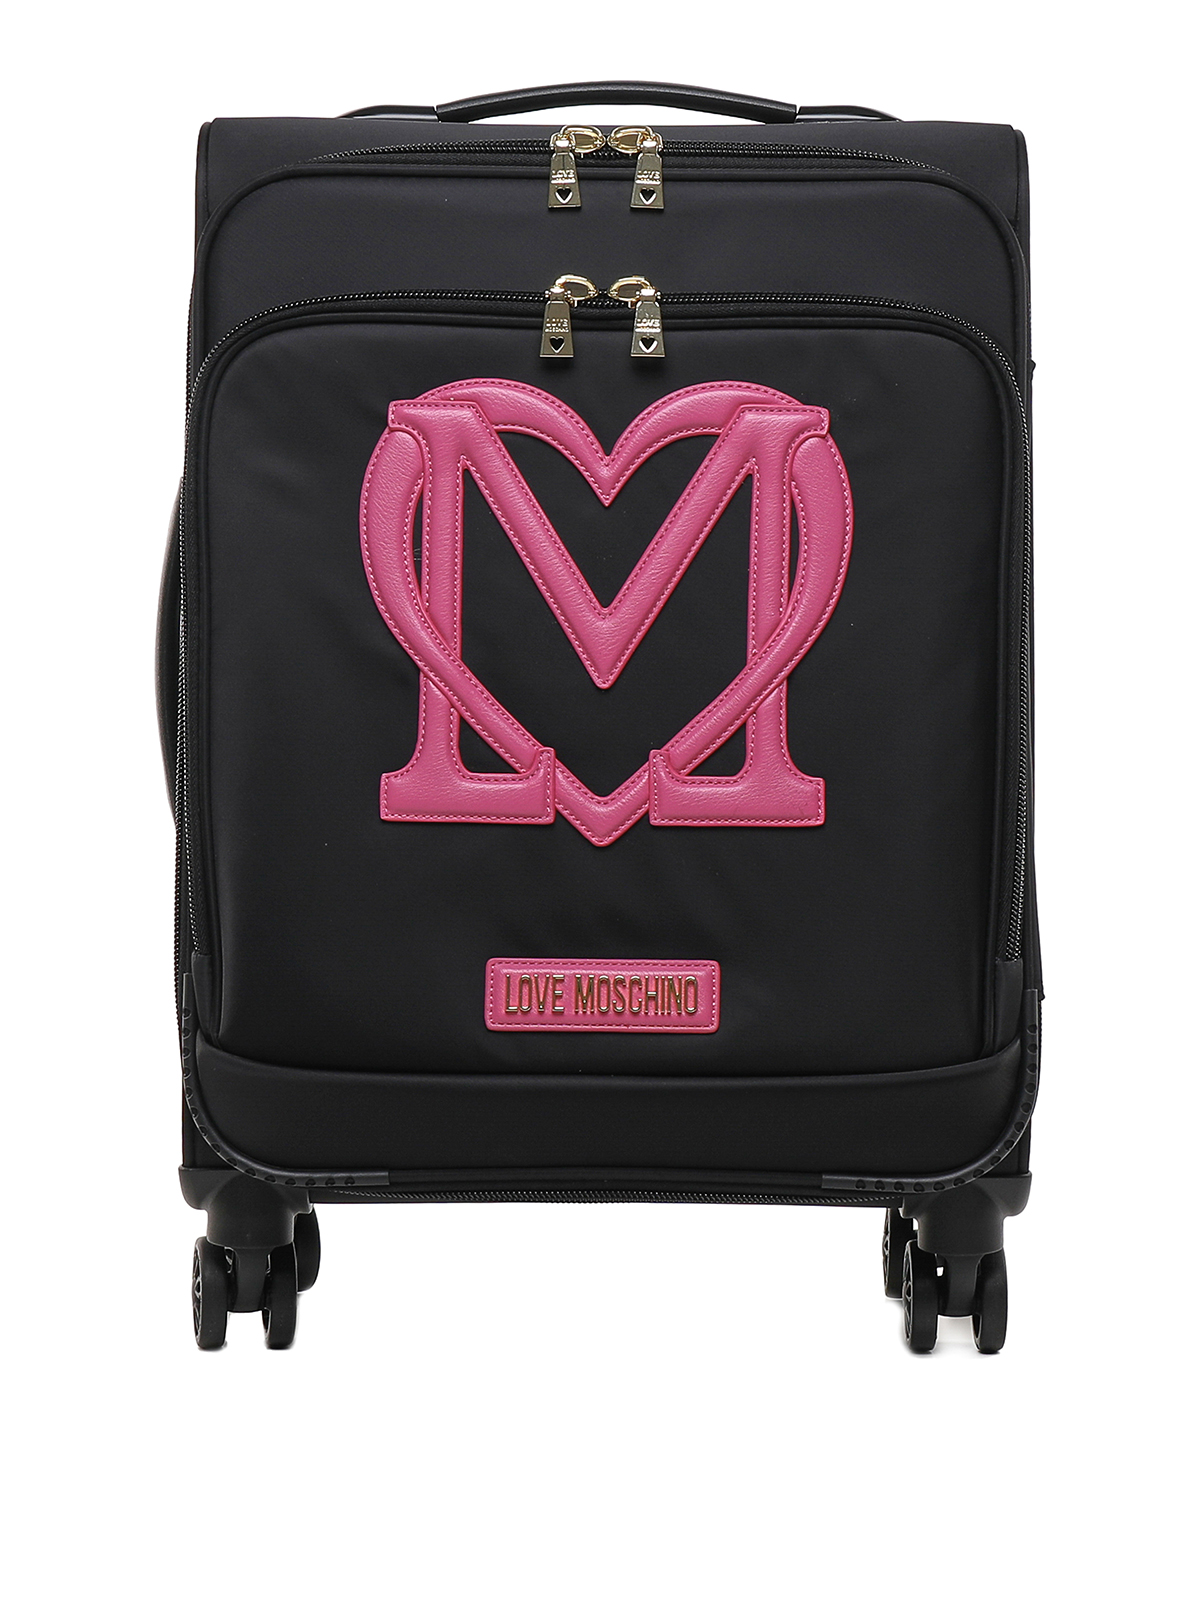 Love Moschino Bags & Backpacks - shop online